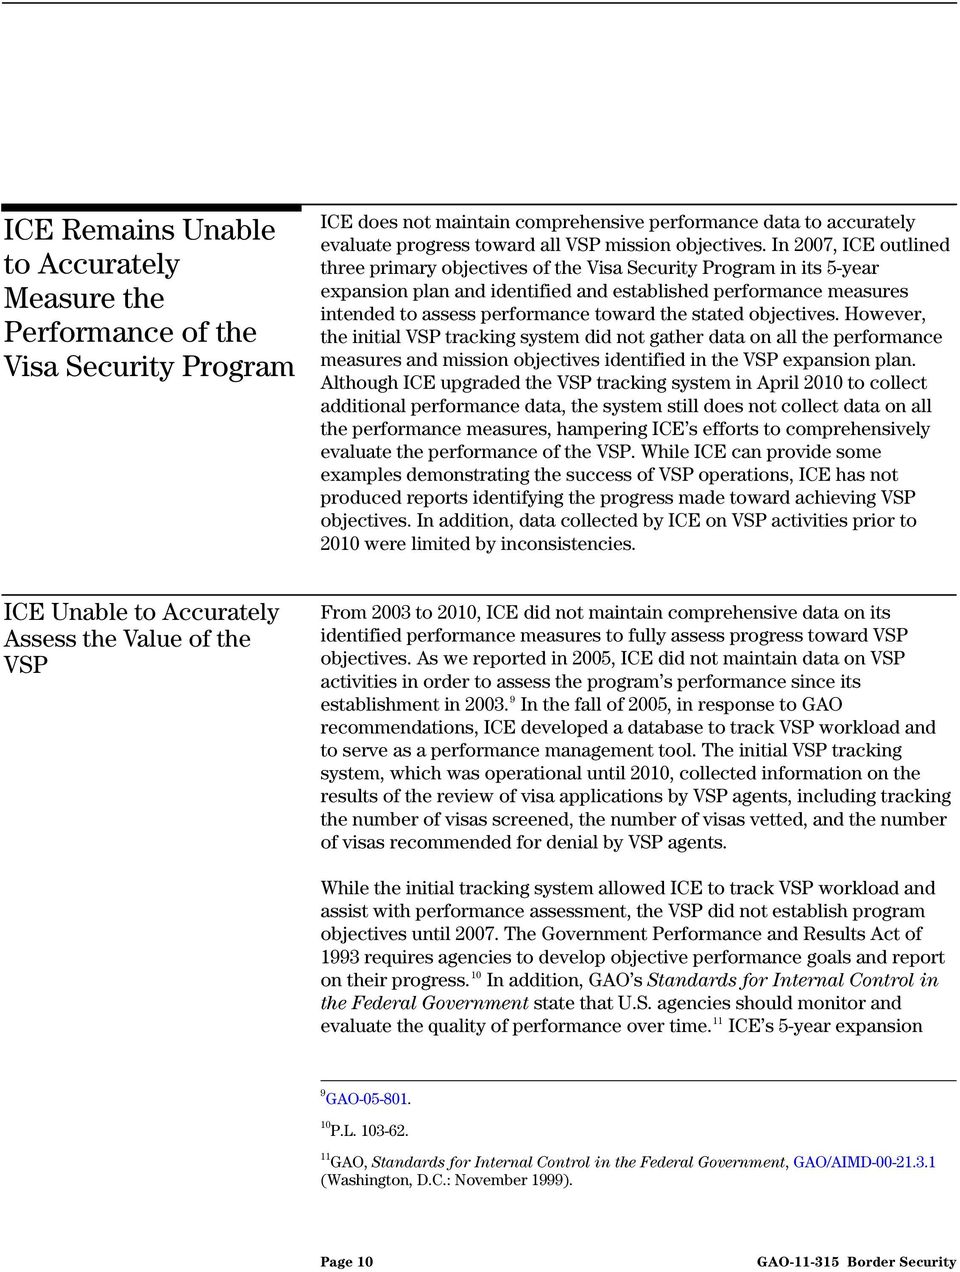 In 2007, ICE outlined three primary objectives of the Visa Security Program in its 5-year expansion plan and identified and established performance measures intended to assess performance toward the